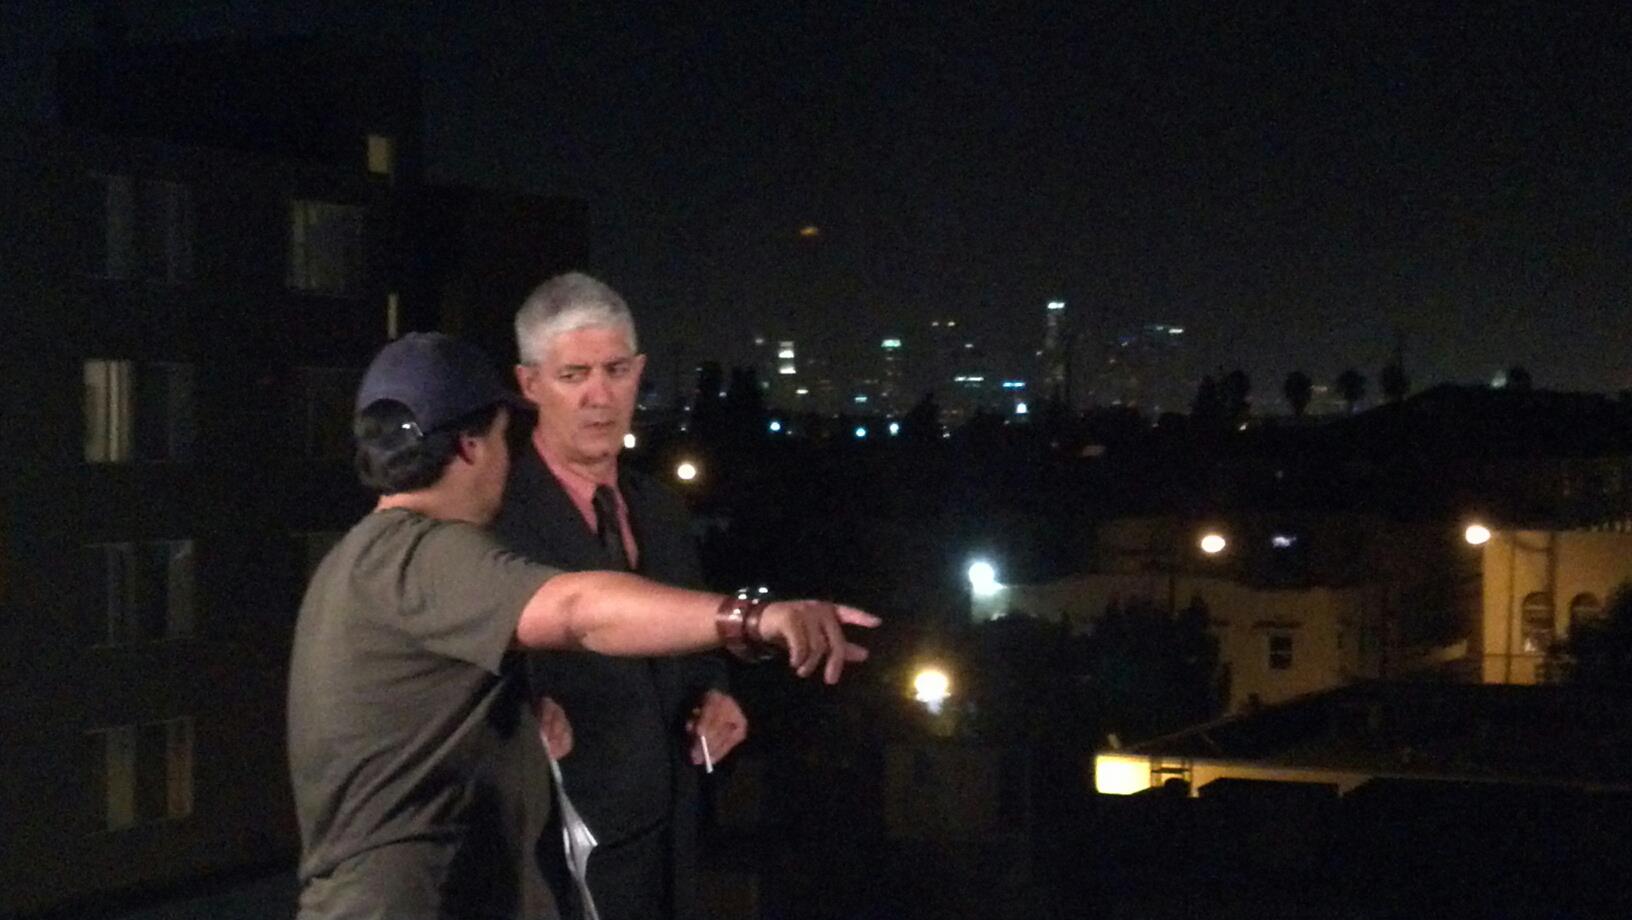 Working with Anthony Croupe rooftop shoot for 'REVEREND'